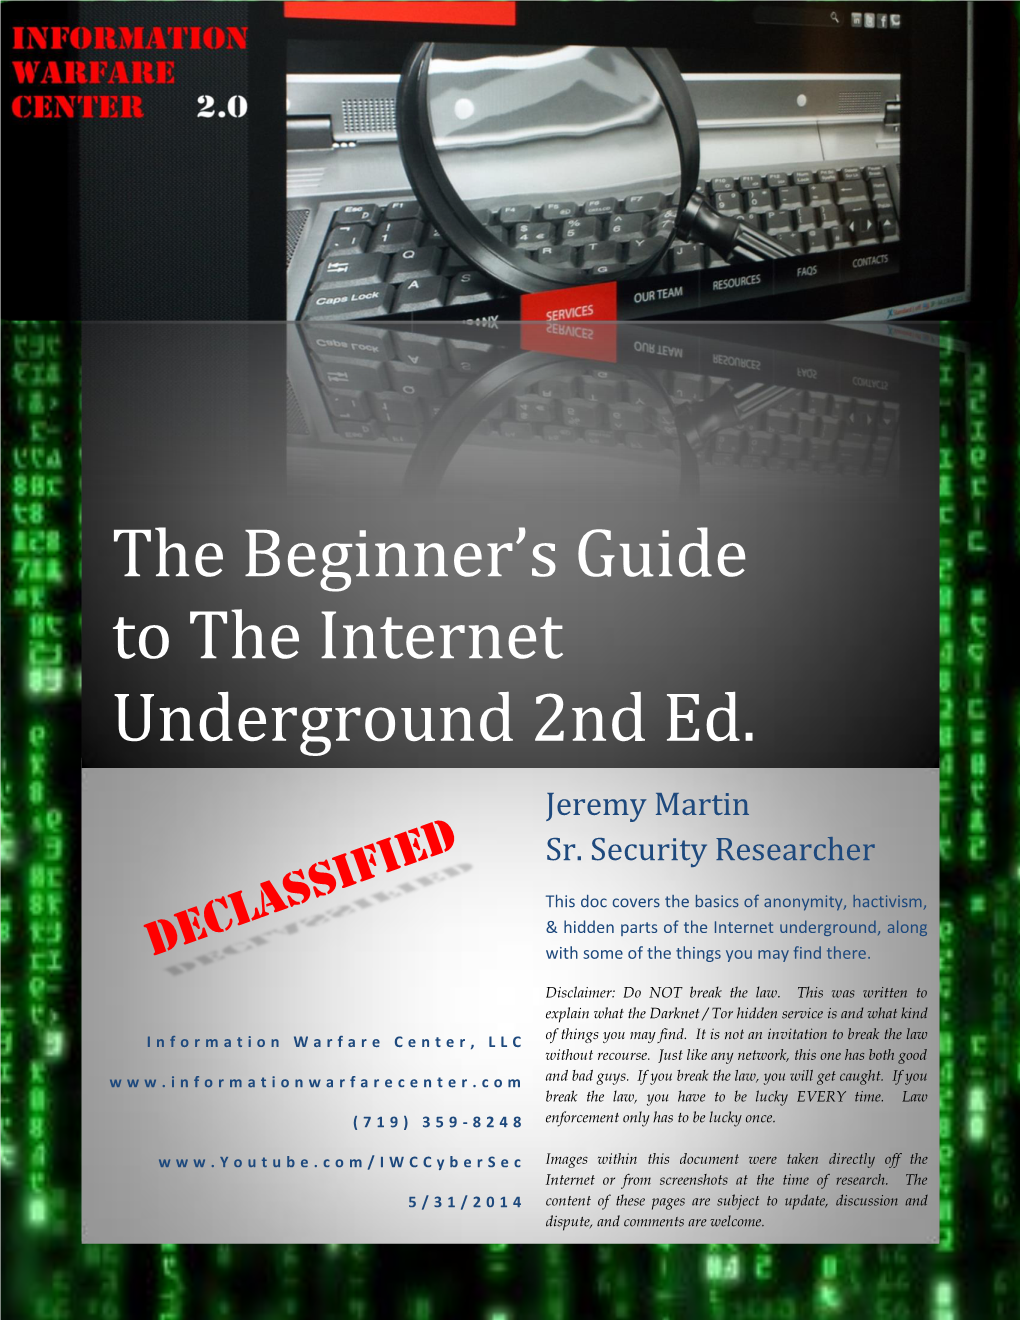 The Beginner's Guide to the Internet Underground 2Nd